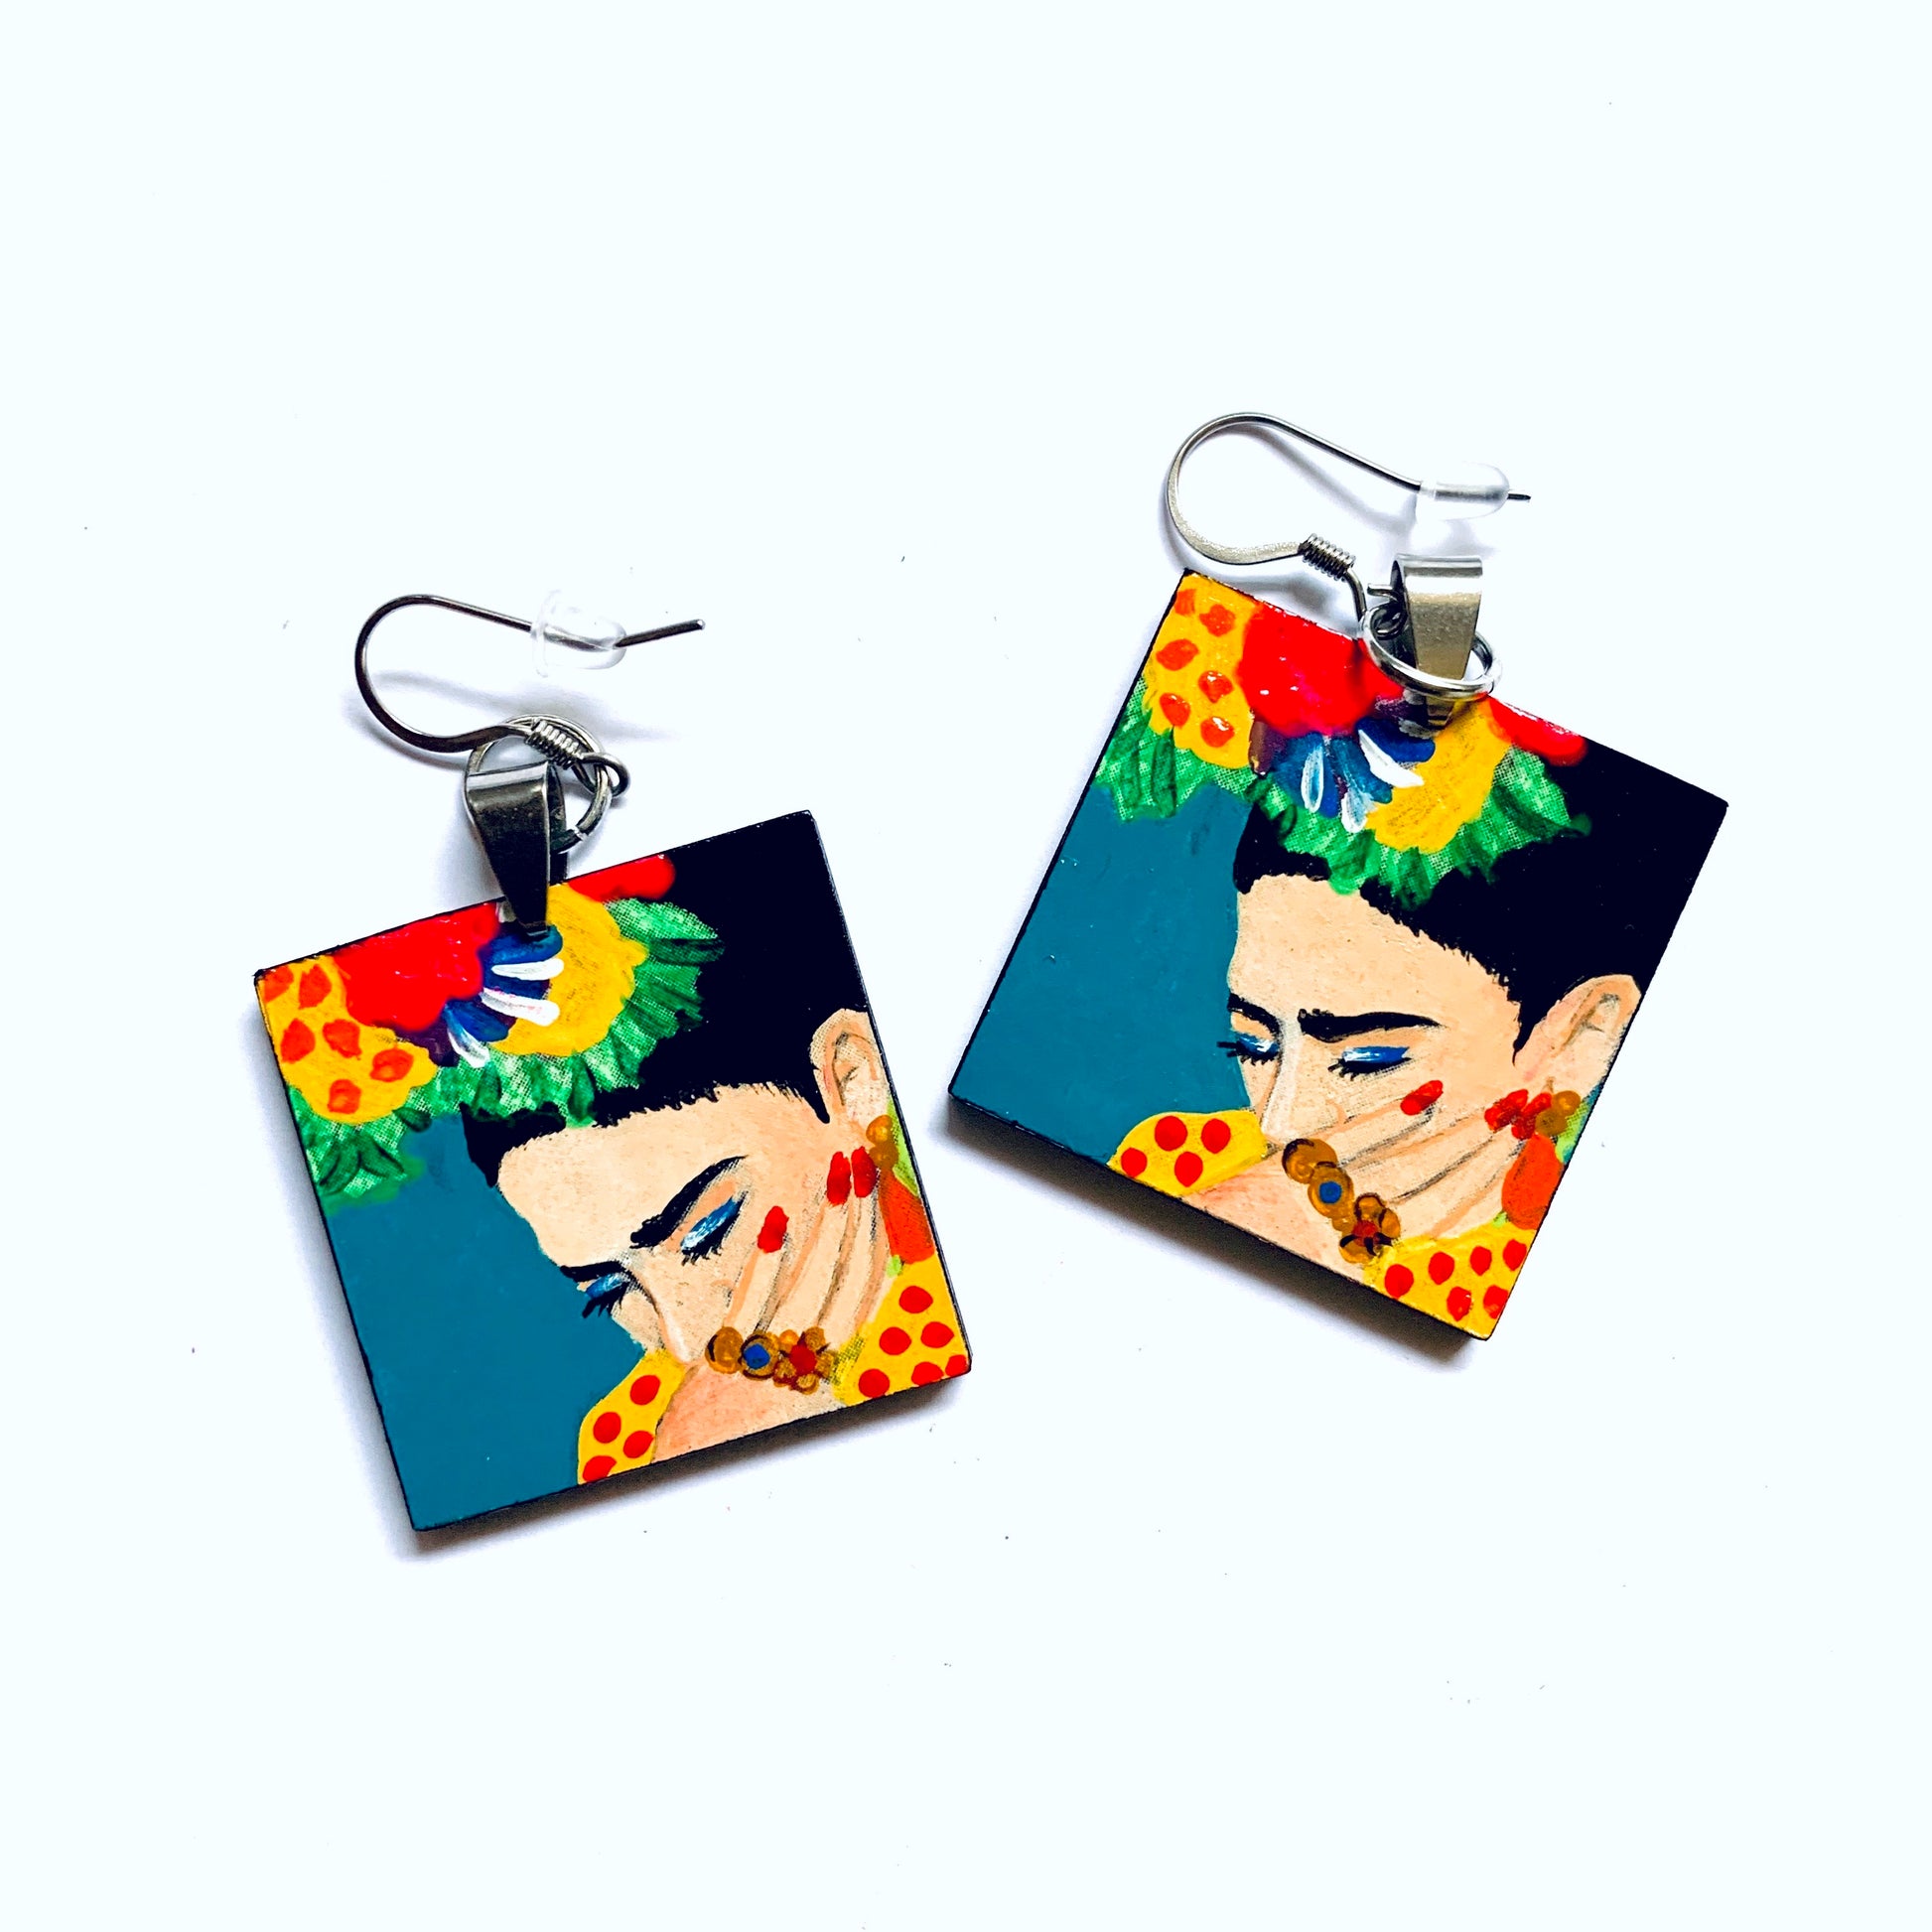 Frida Earrings: Hand Painted Frida Kahlo inspired drop and dangle wooden square earrings by Fridamaniacs for Fridalovers. Mexican jewelry Art to Wear. Women and Girls gift idea. Mexico Folk Art